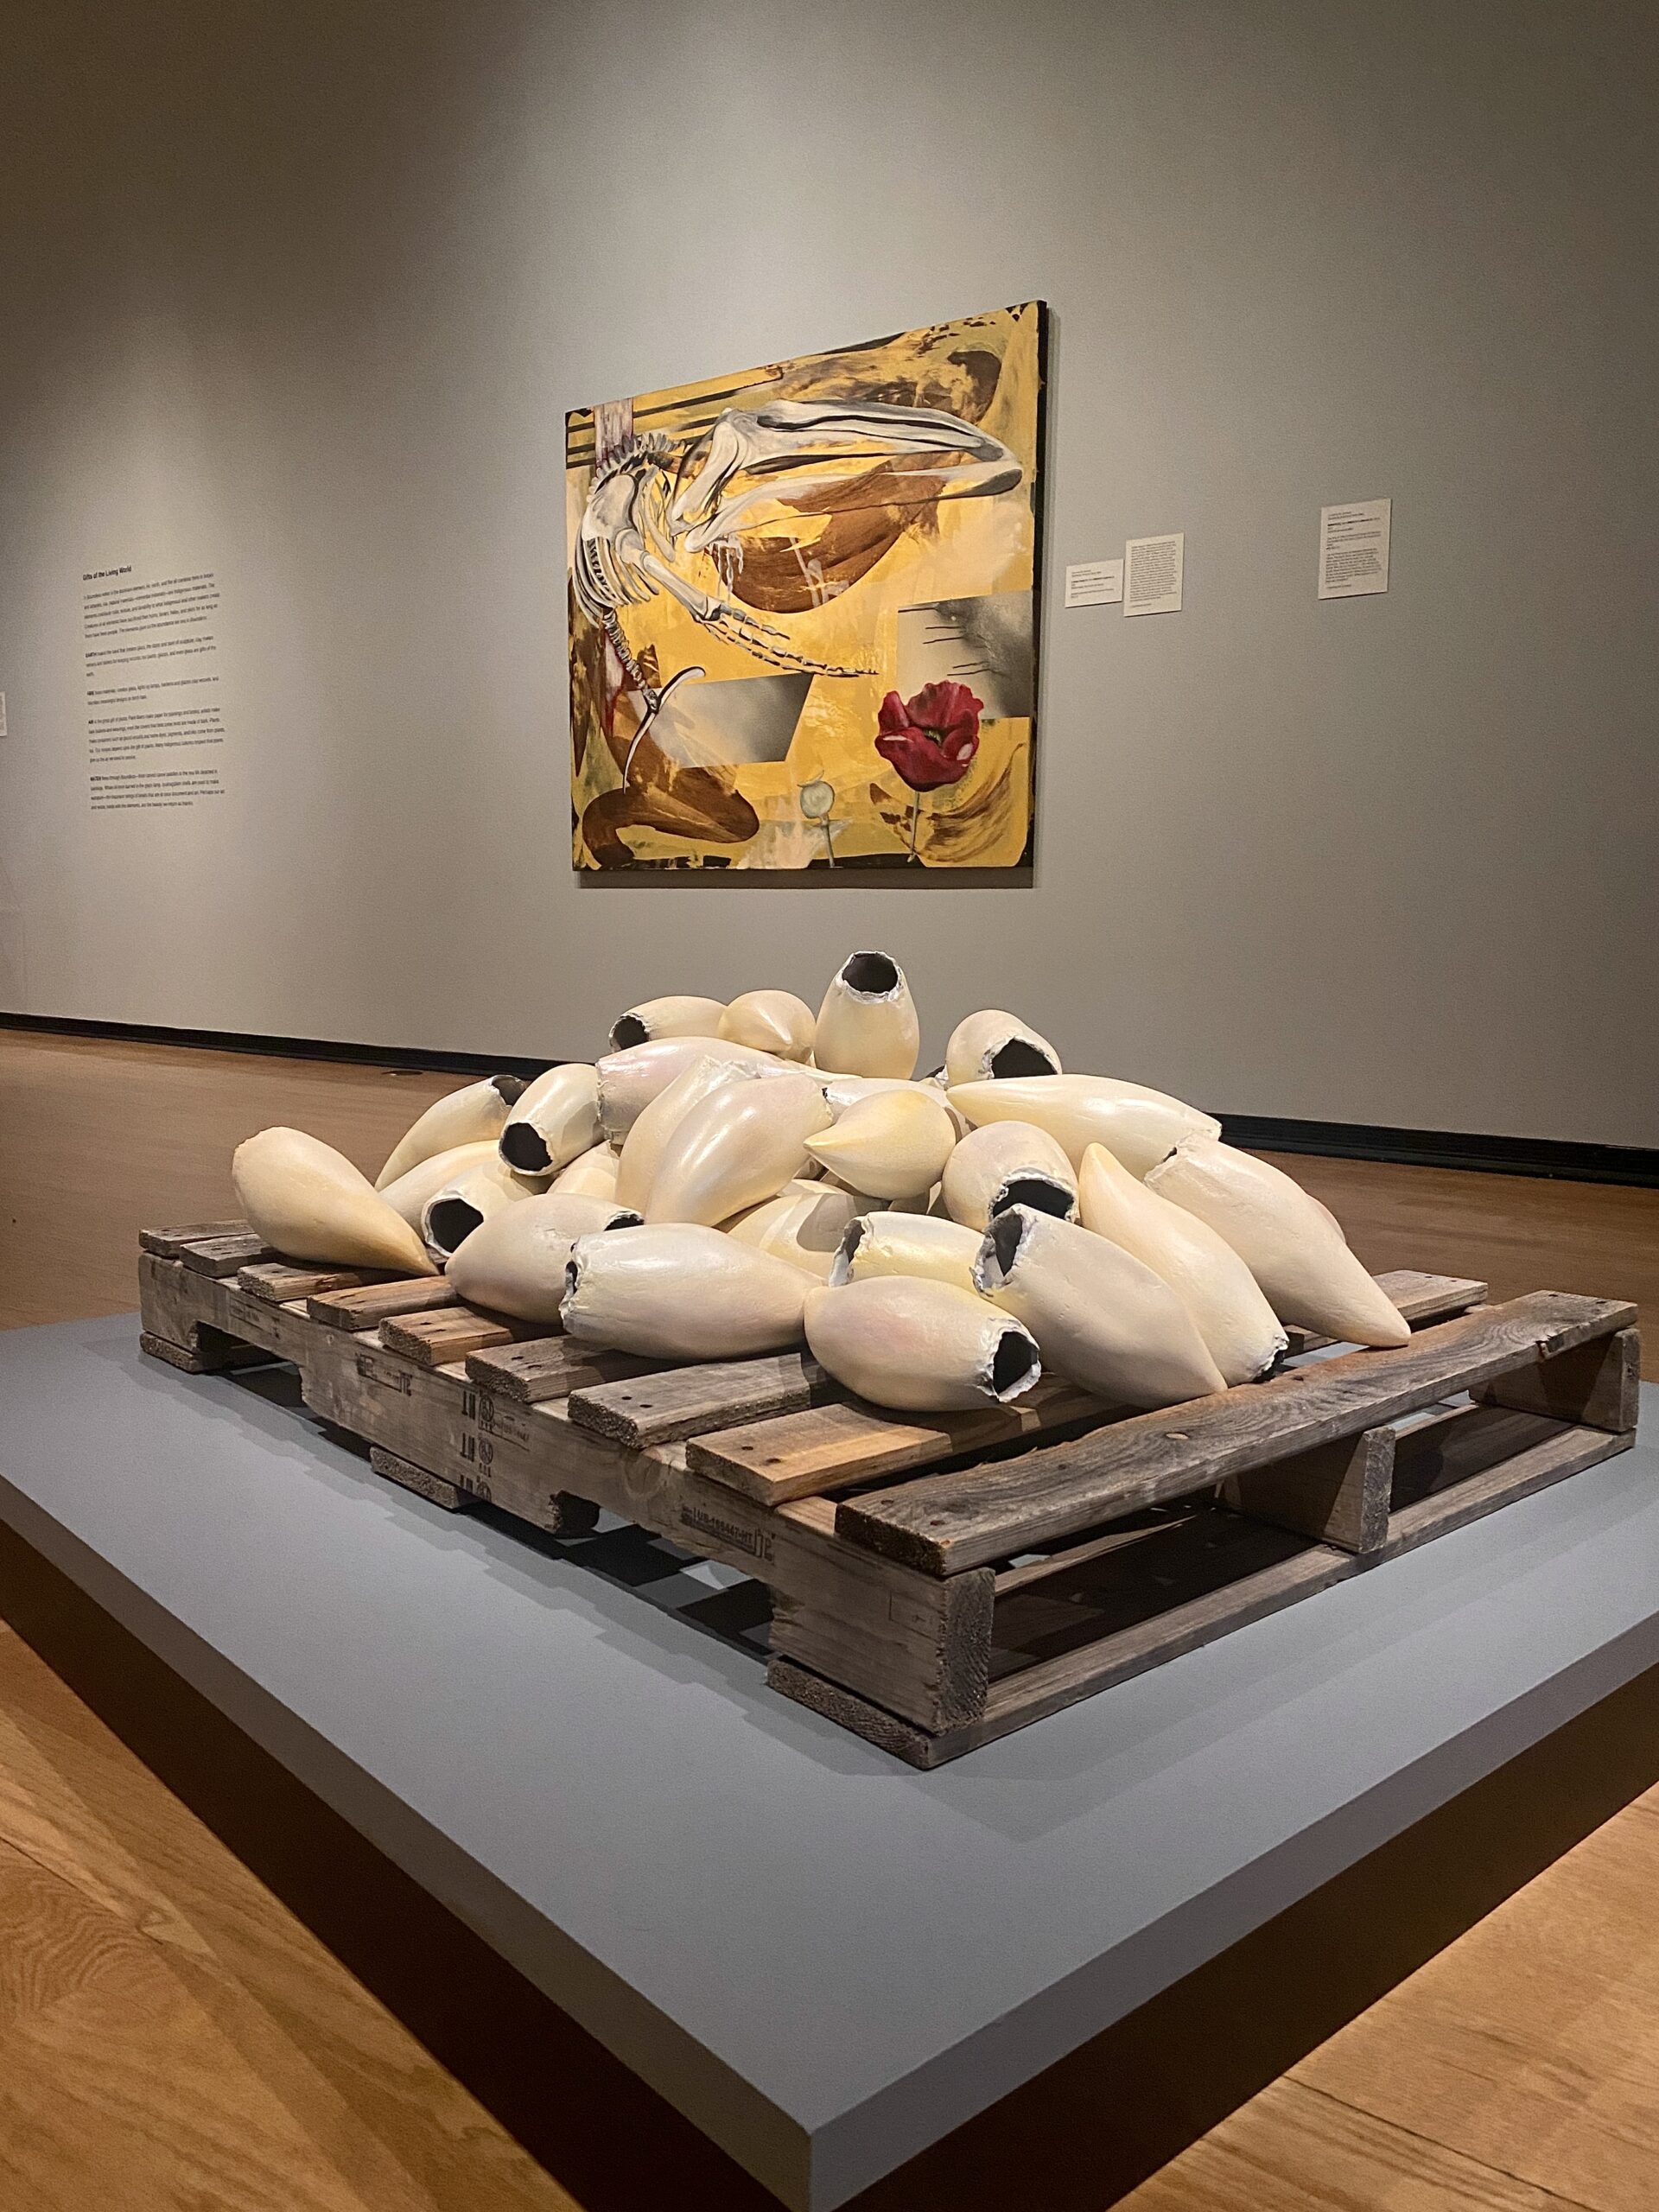 Courtney M. Leonard in BOUNDLESS at the Mead Art Museum, Amherst, MA